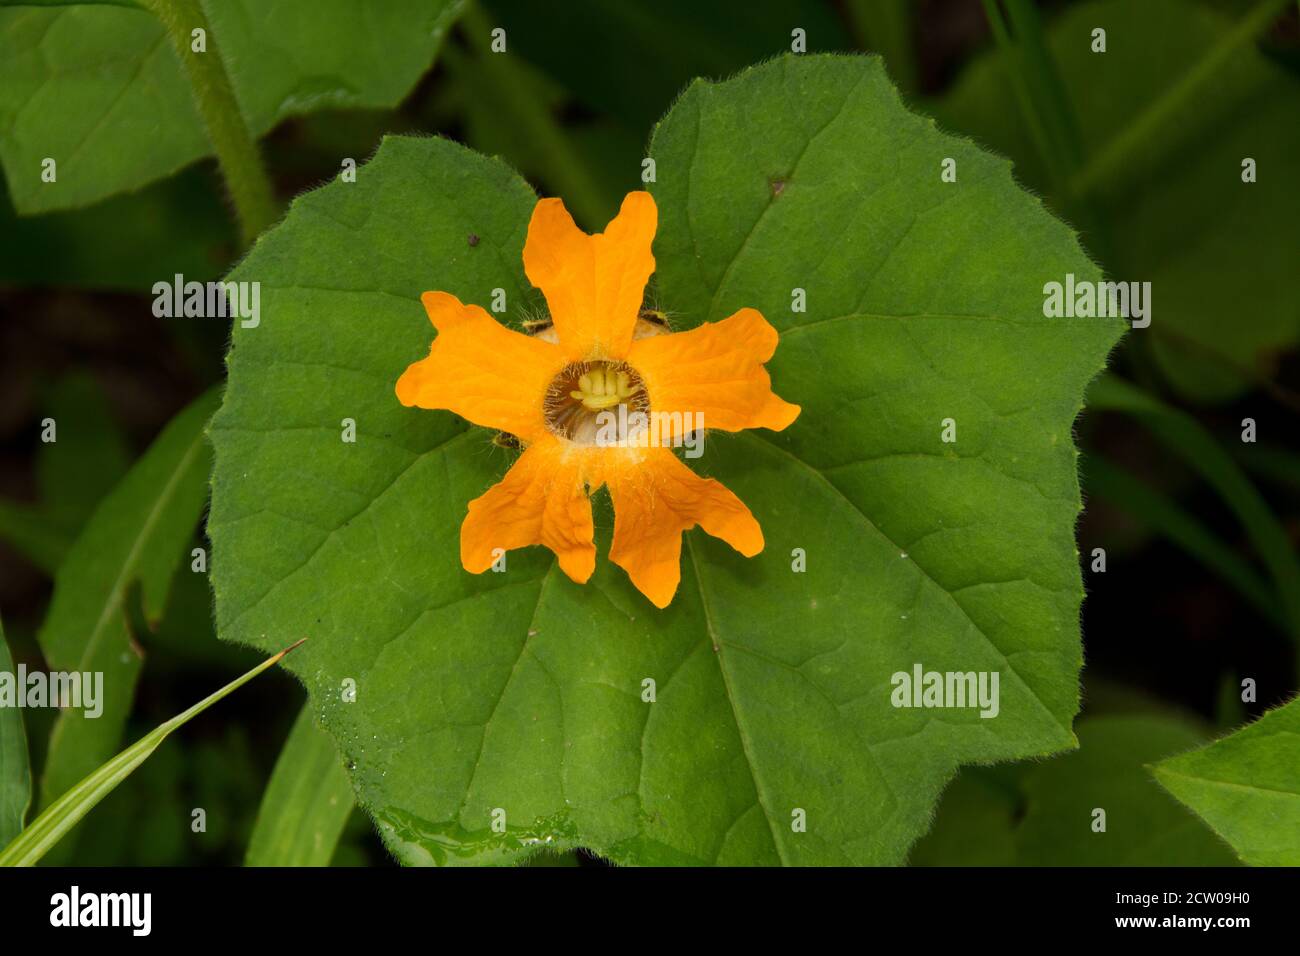 The flowers of the Fish-tail Creeper vary from a yellow-orange to a bright orange. A member of the cucumber family they grow in wetter areas Stock Photo